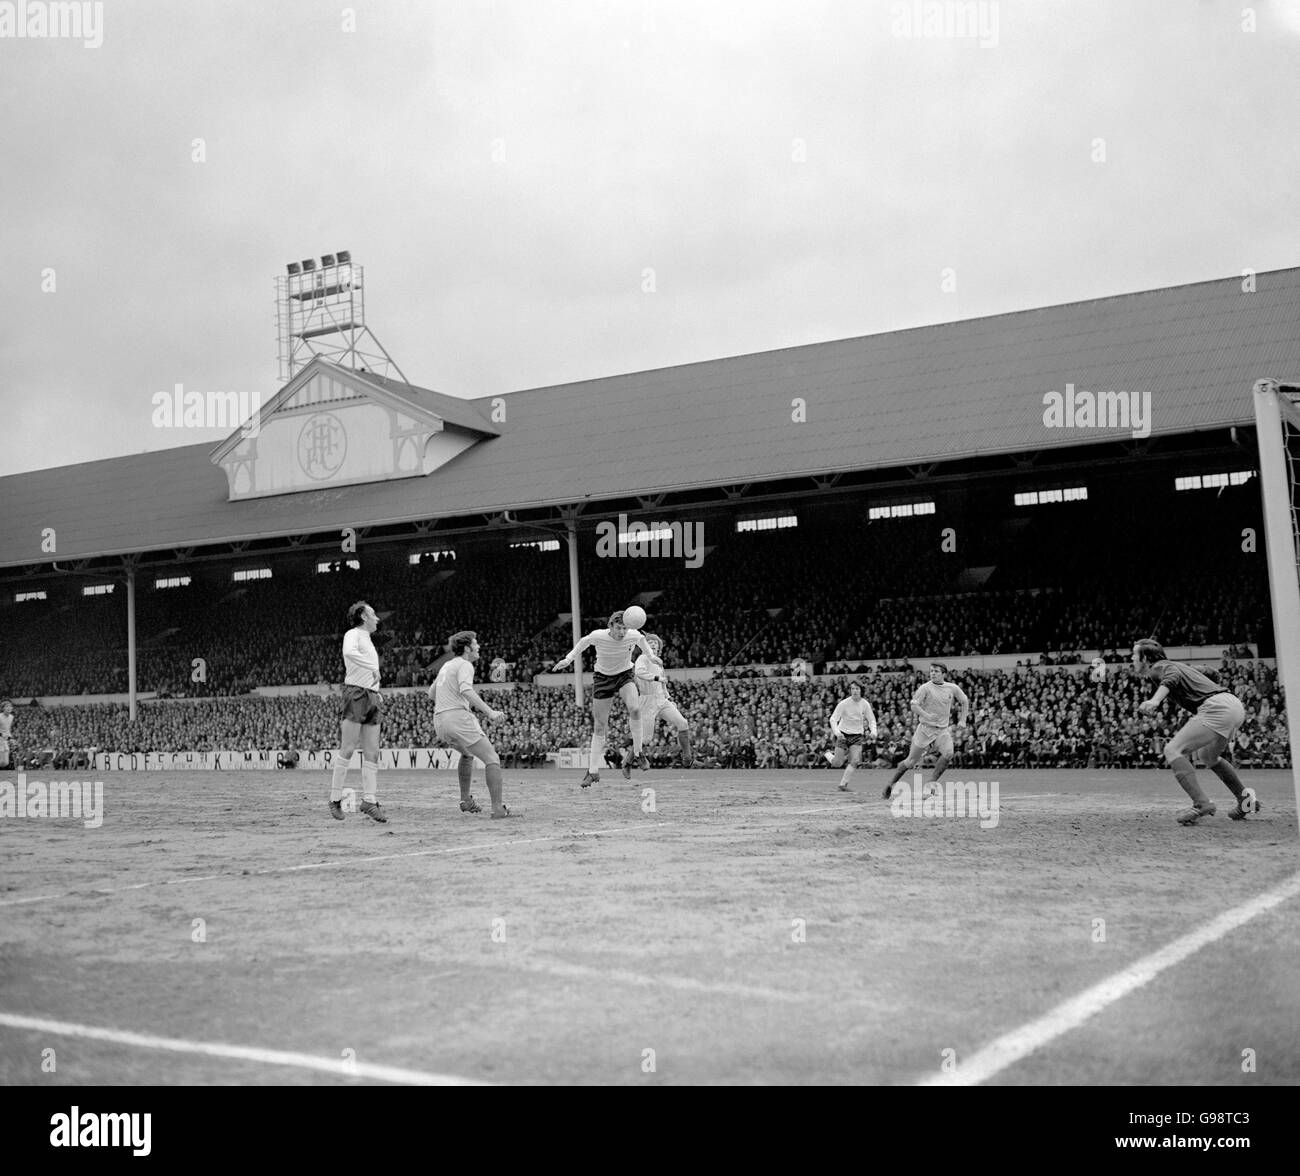 Football - Football League Division One - Tottenham Hotspur v Coventry City - White Hart Lane Banque D'Images